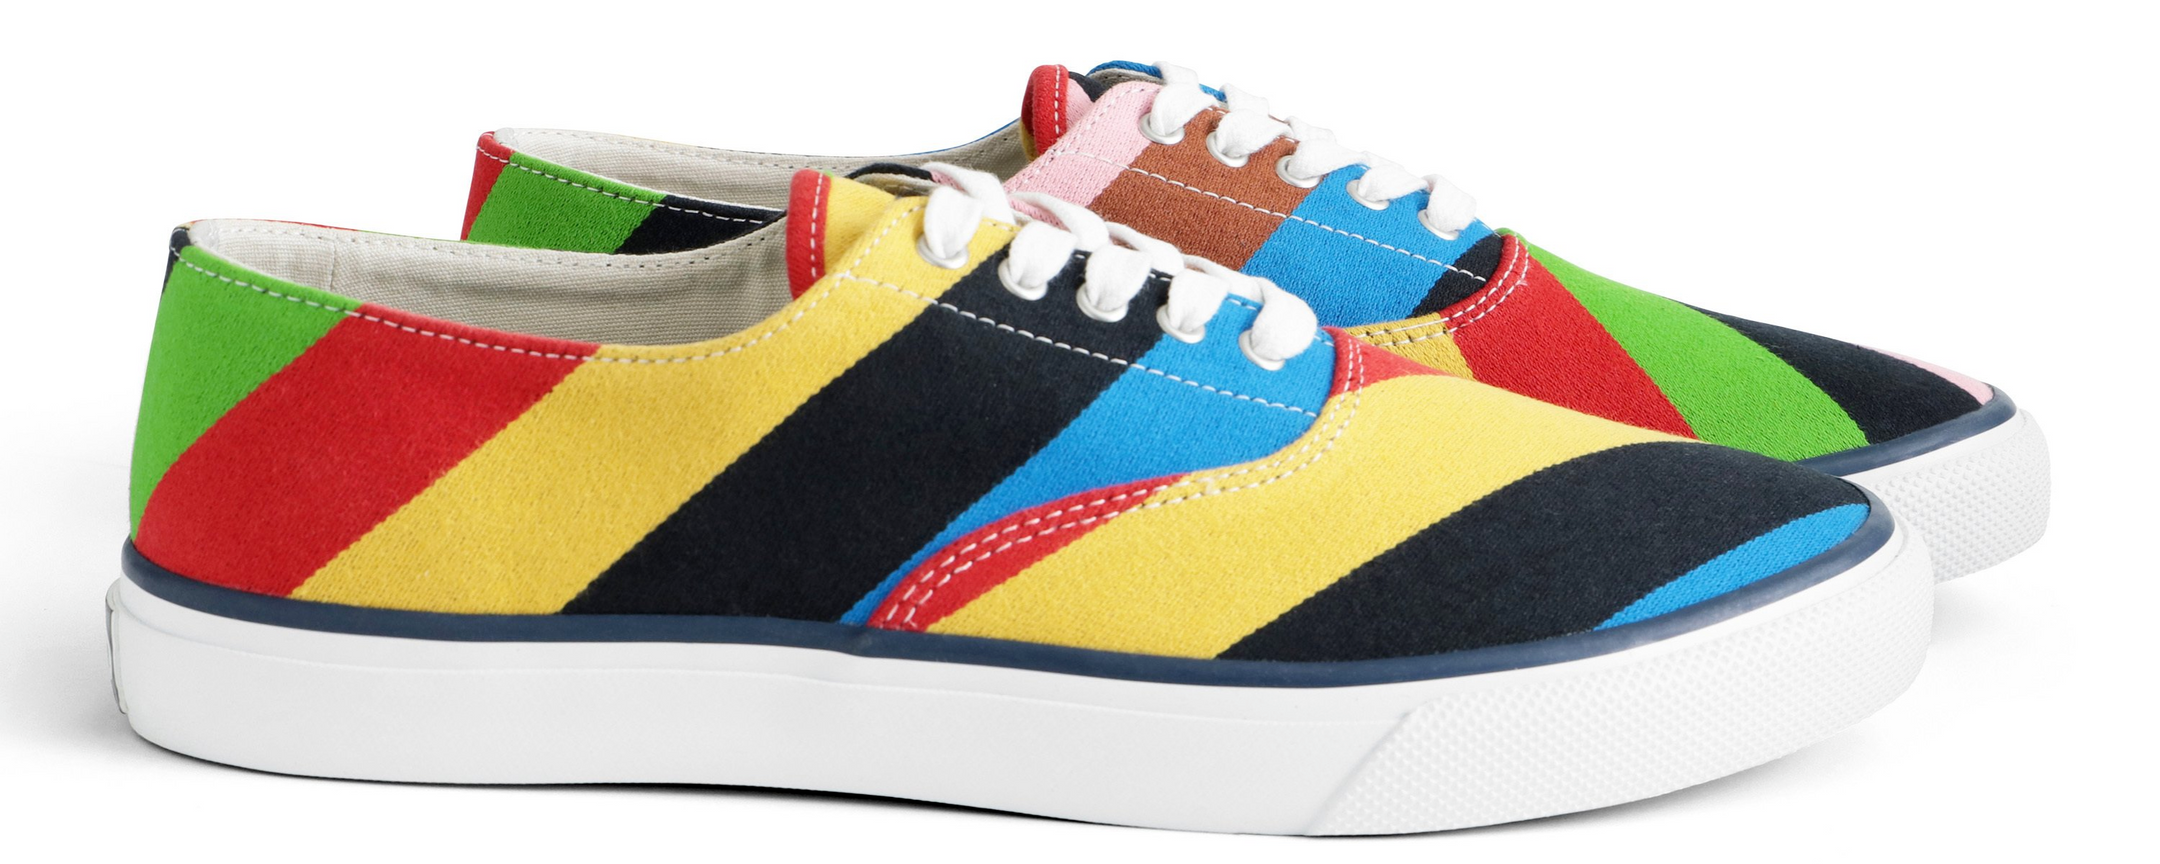 FW20 Rowing Blazers x Sperry CVOs (Our limited edition collaboration is available now.)